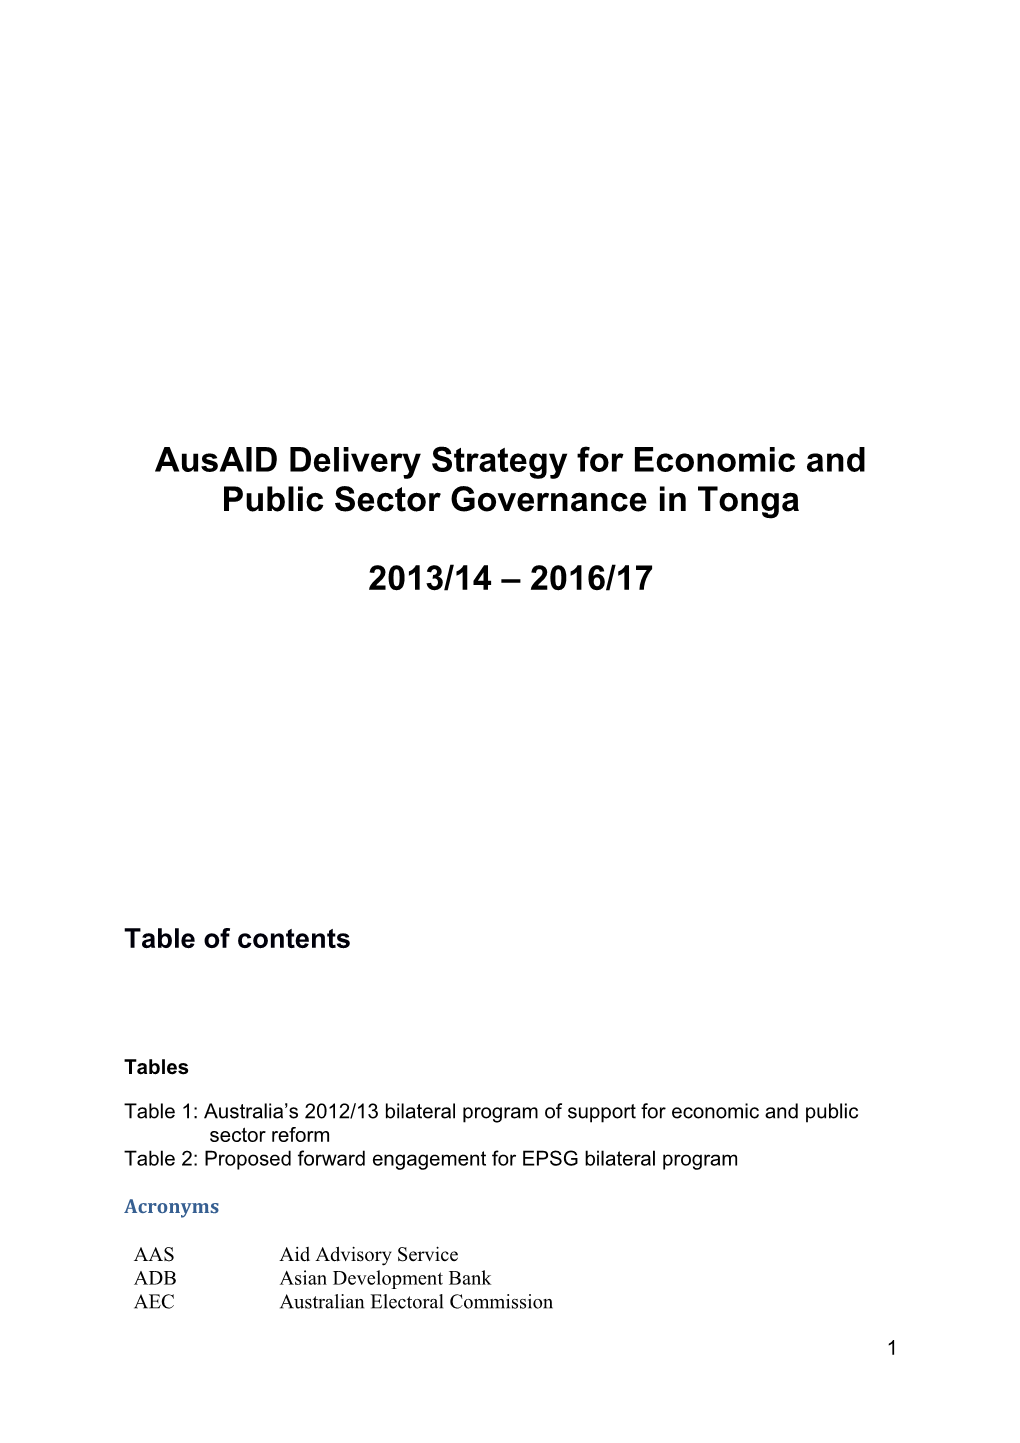 Ausaid Delivery Strategy for Economic and Public Sector Governance in Tonga